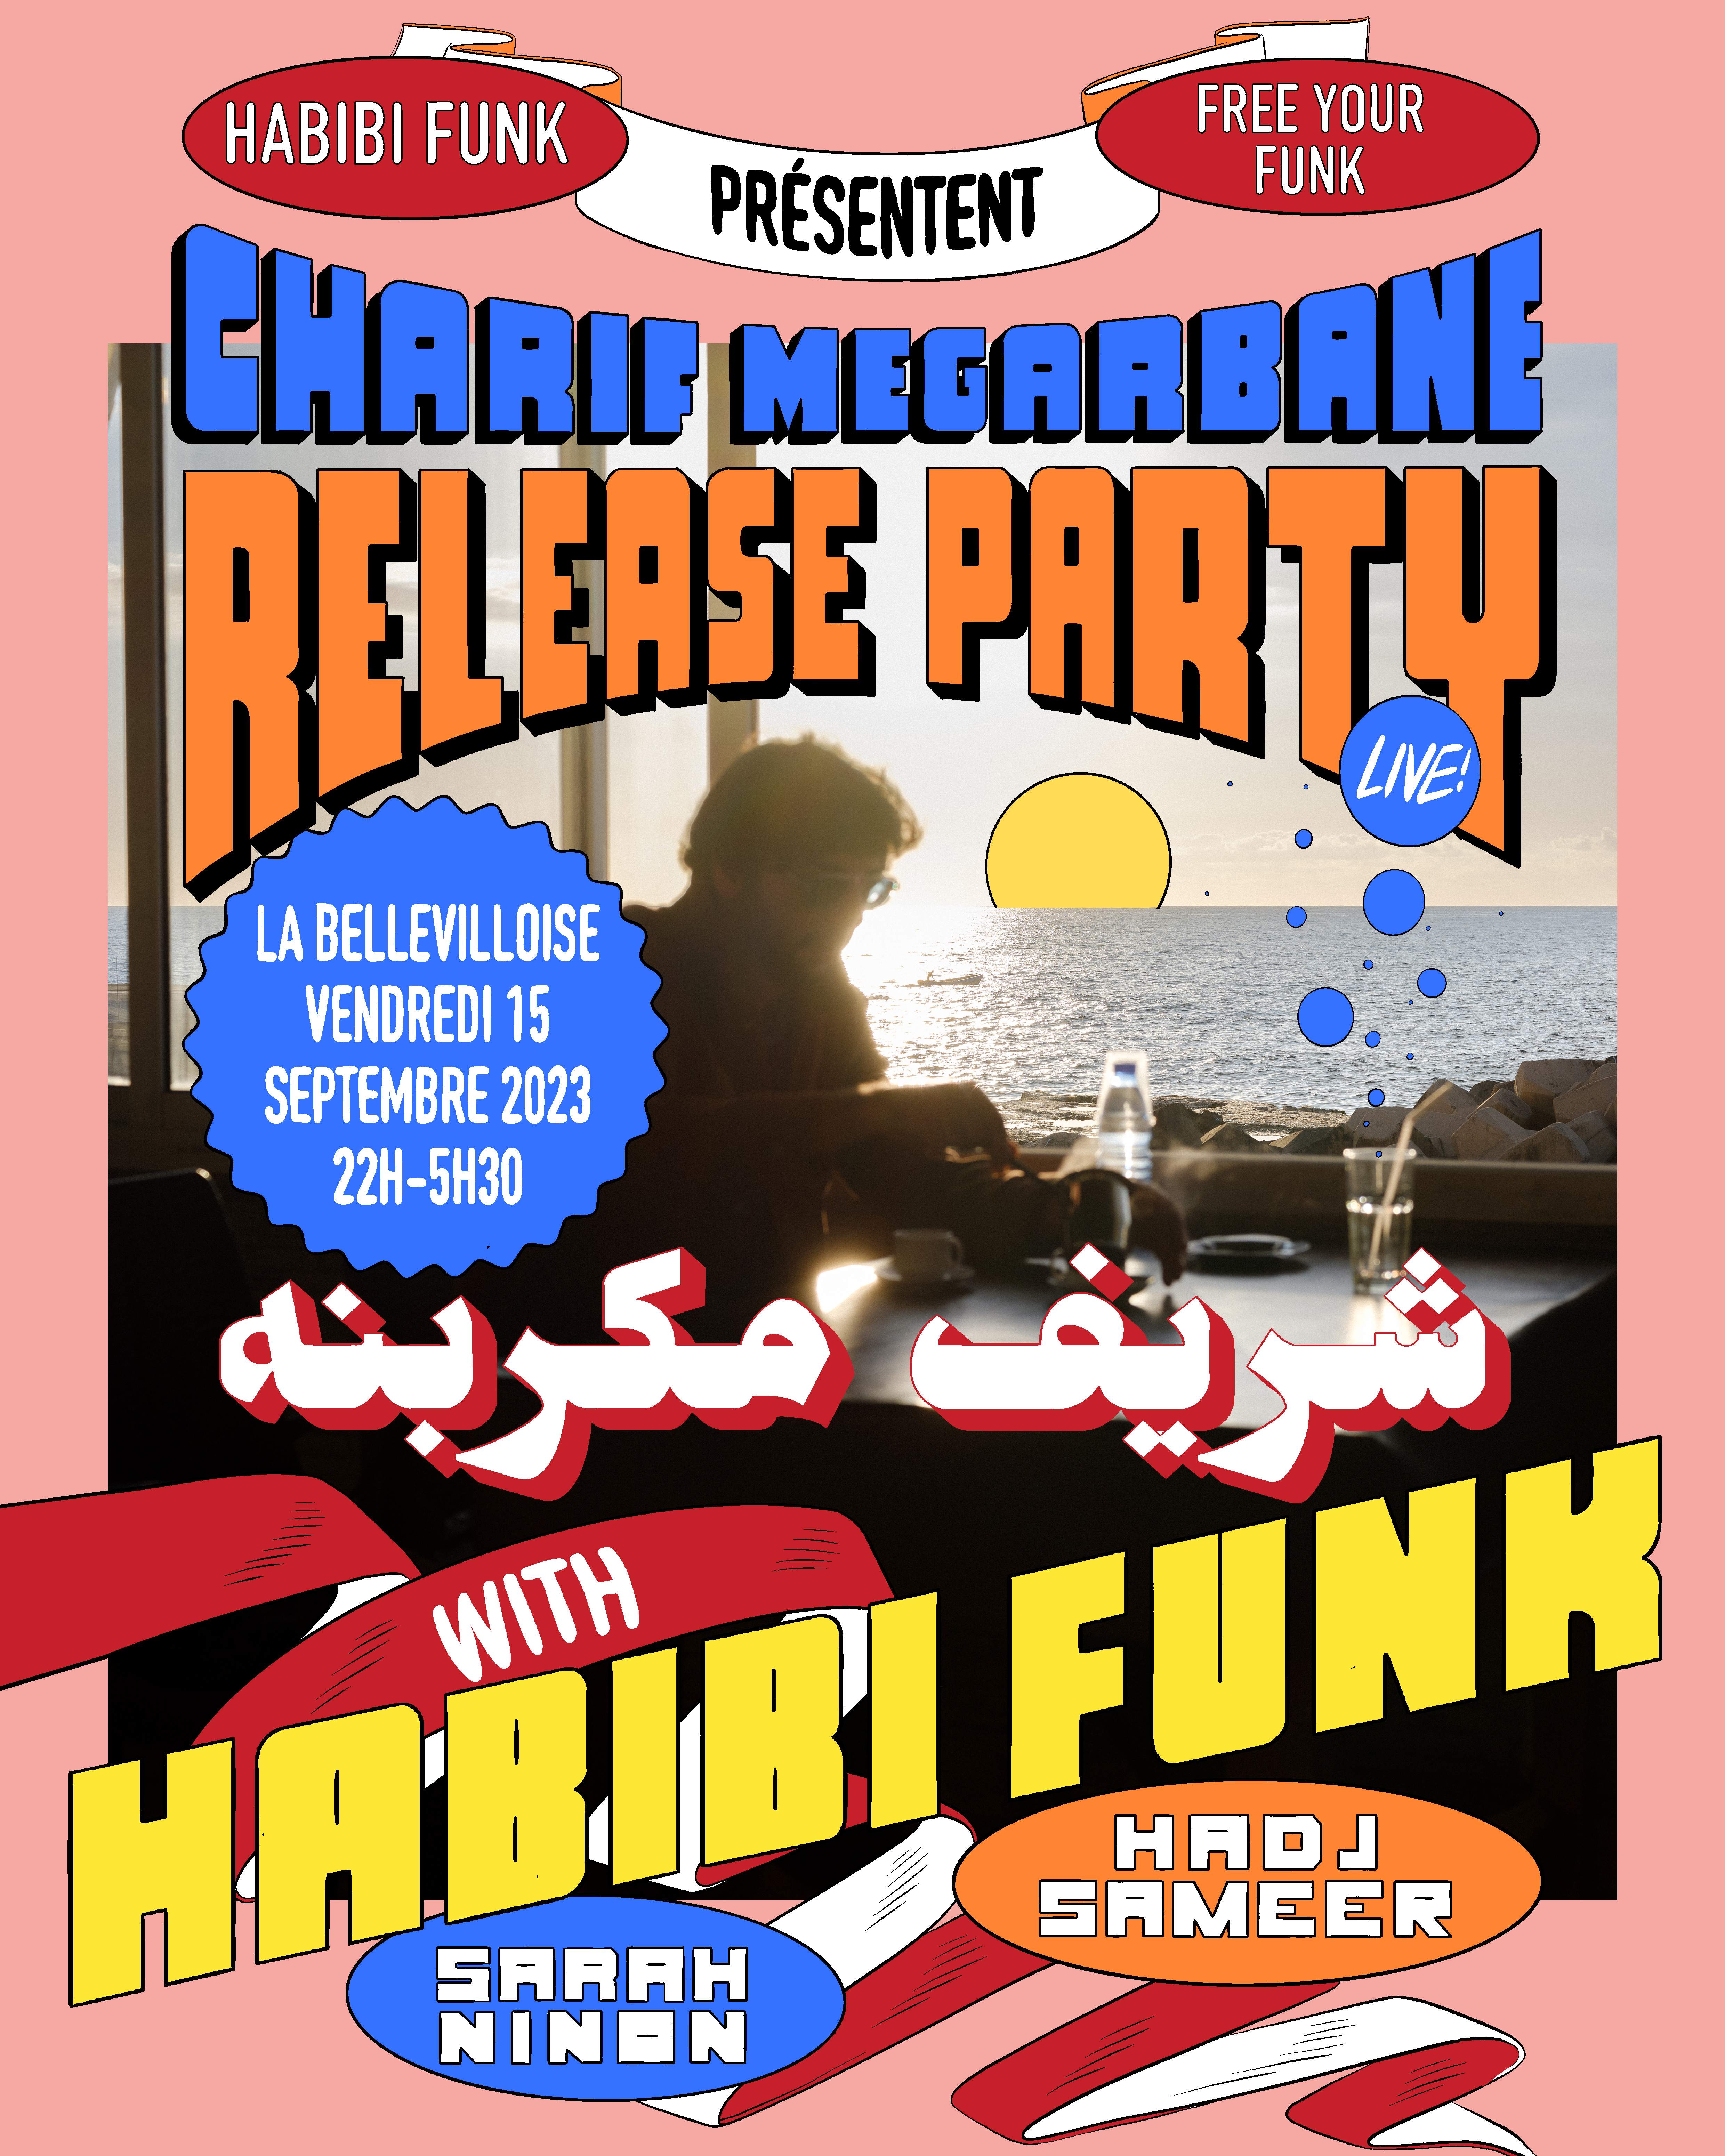 Free Your Funk: Habibi Funk & Charif Megarbane Release Party - フライヤー裏